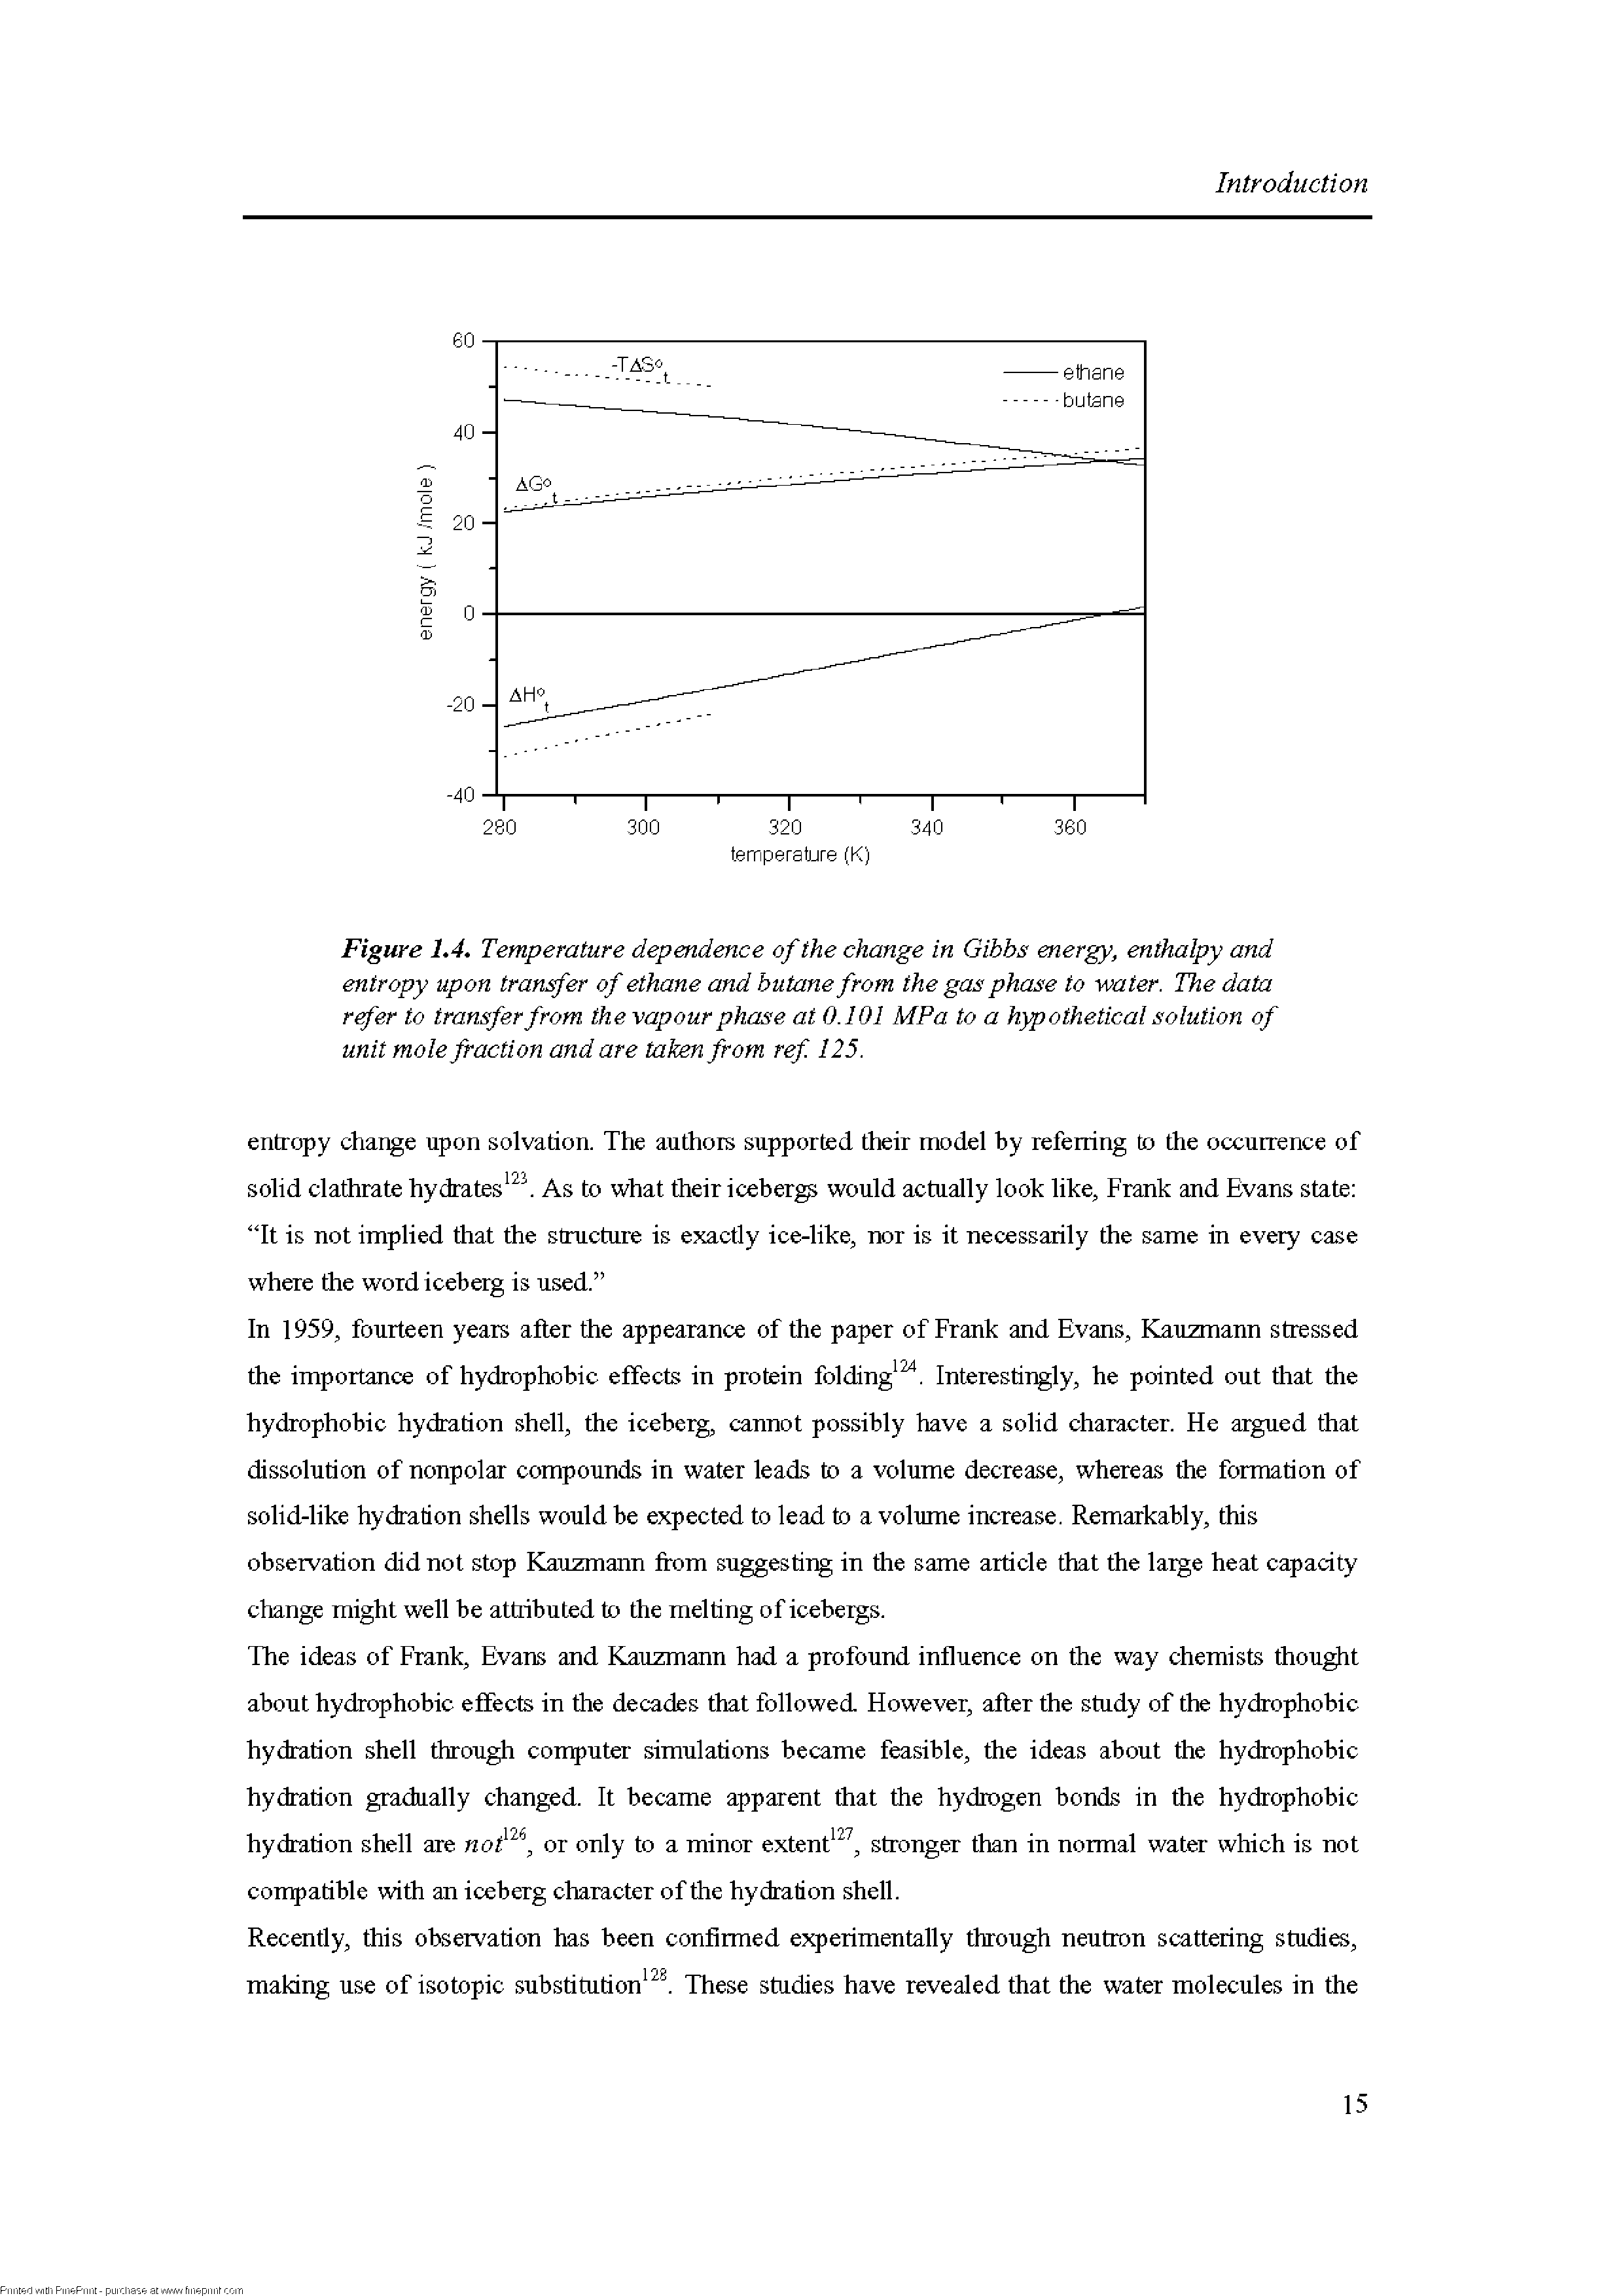 Figure 1.4. Temperature dependence of the change in Gihhs energy, enthalpy and entropy upon transfer of ethane and butane from the gas phase to water. The data refer to transfer from the vapour phase at 0.101 MPa to a hypothetical solution of unit mole fraction and are taken from ref. 125.